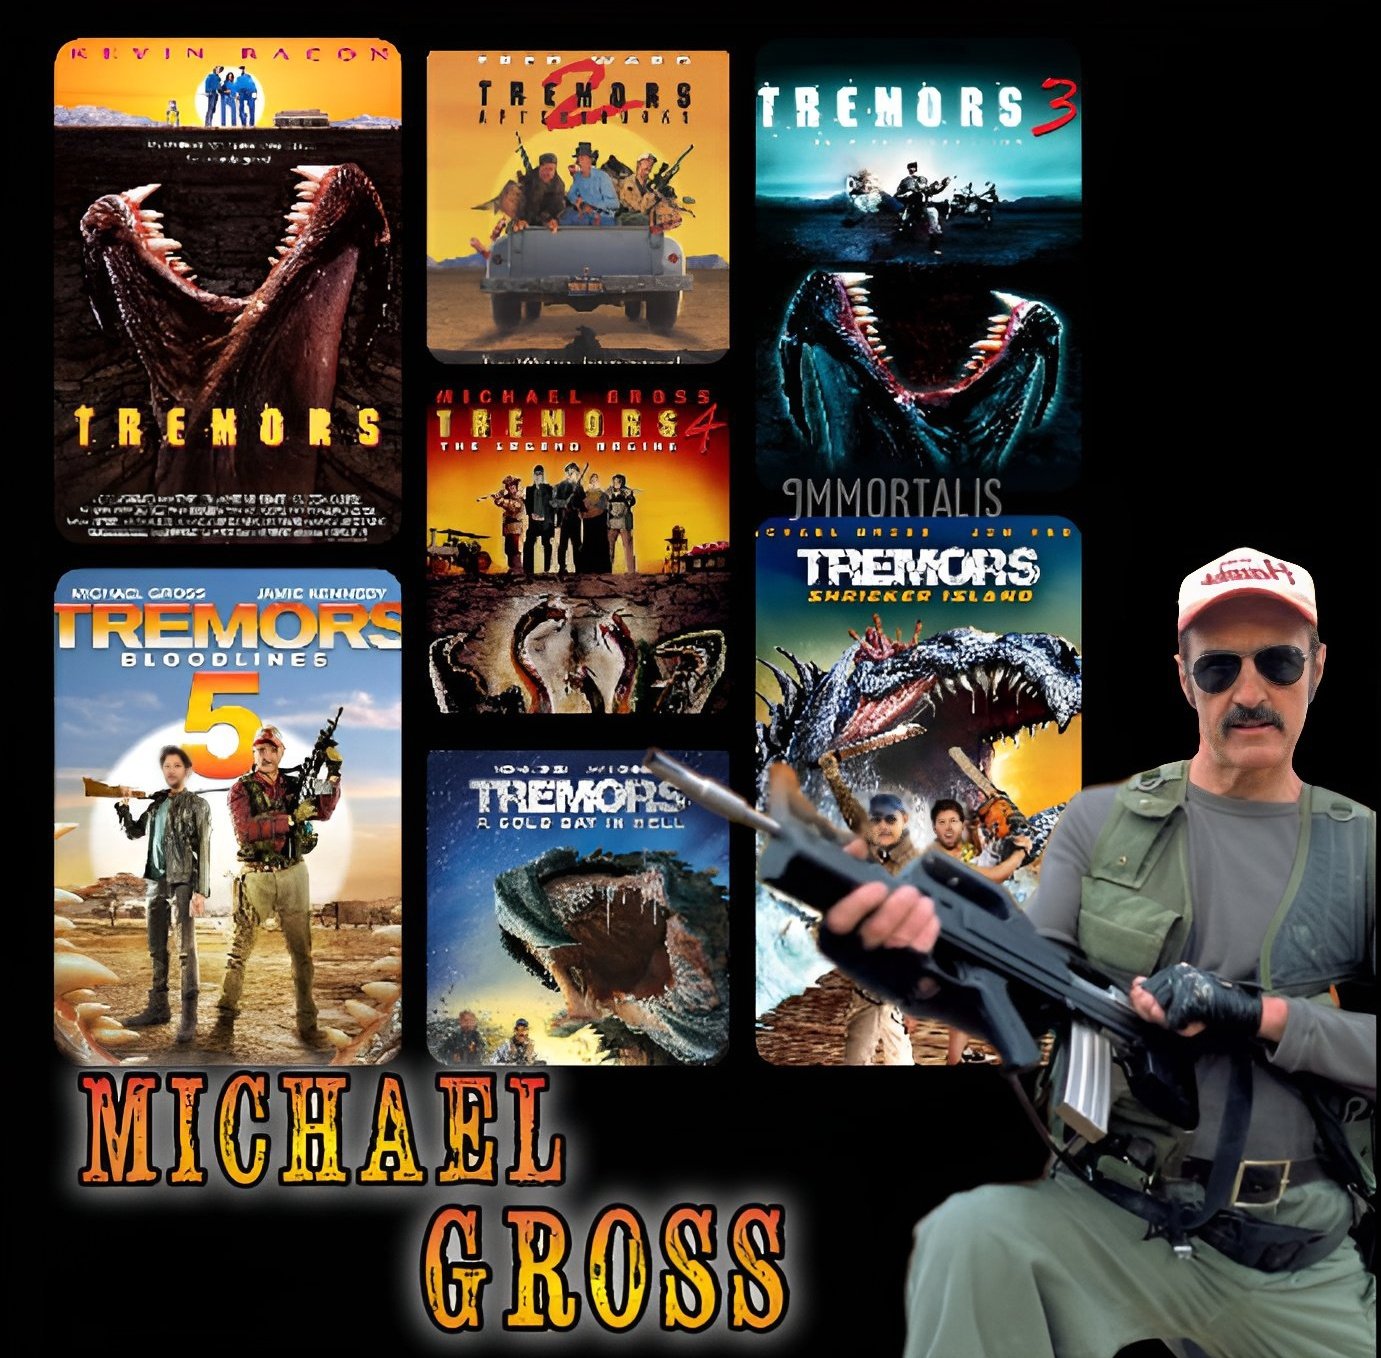 Burt Gummer and Tremors folks.

And a Happy birthday to Michael Gross.  